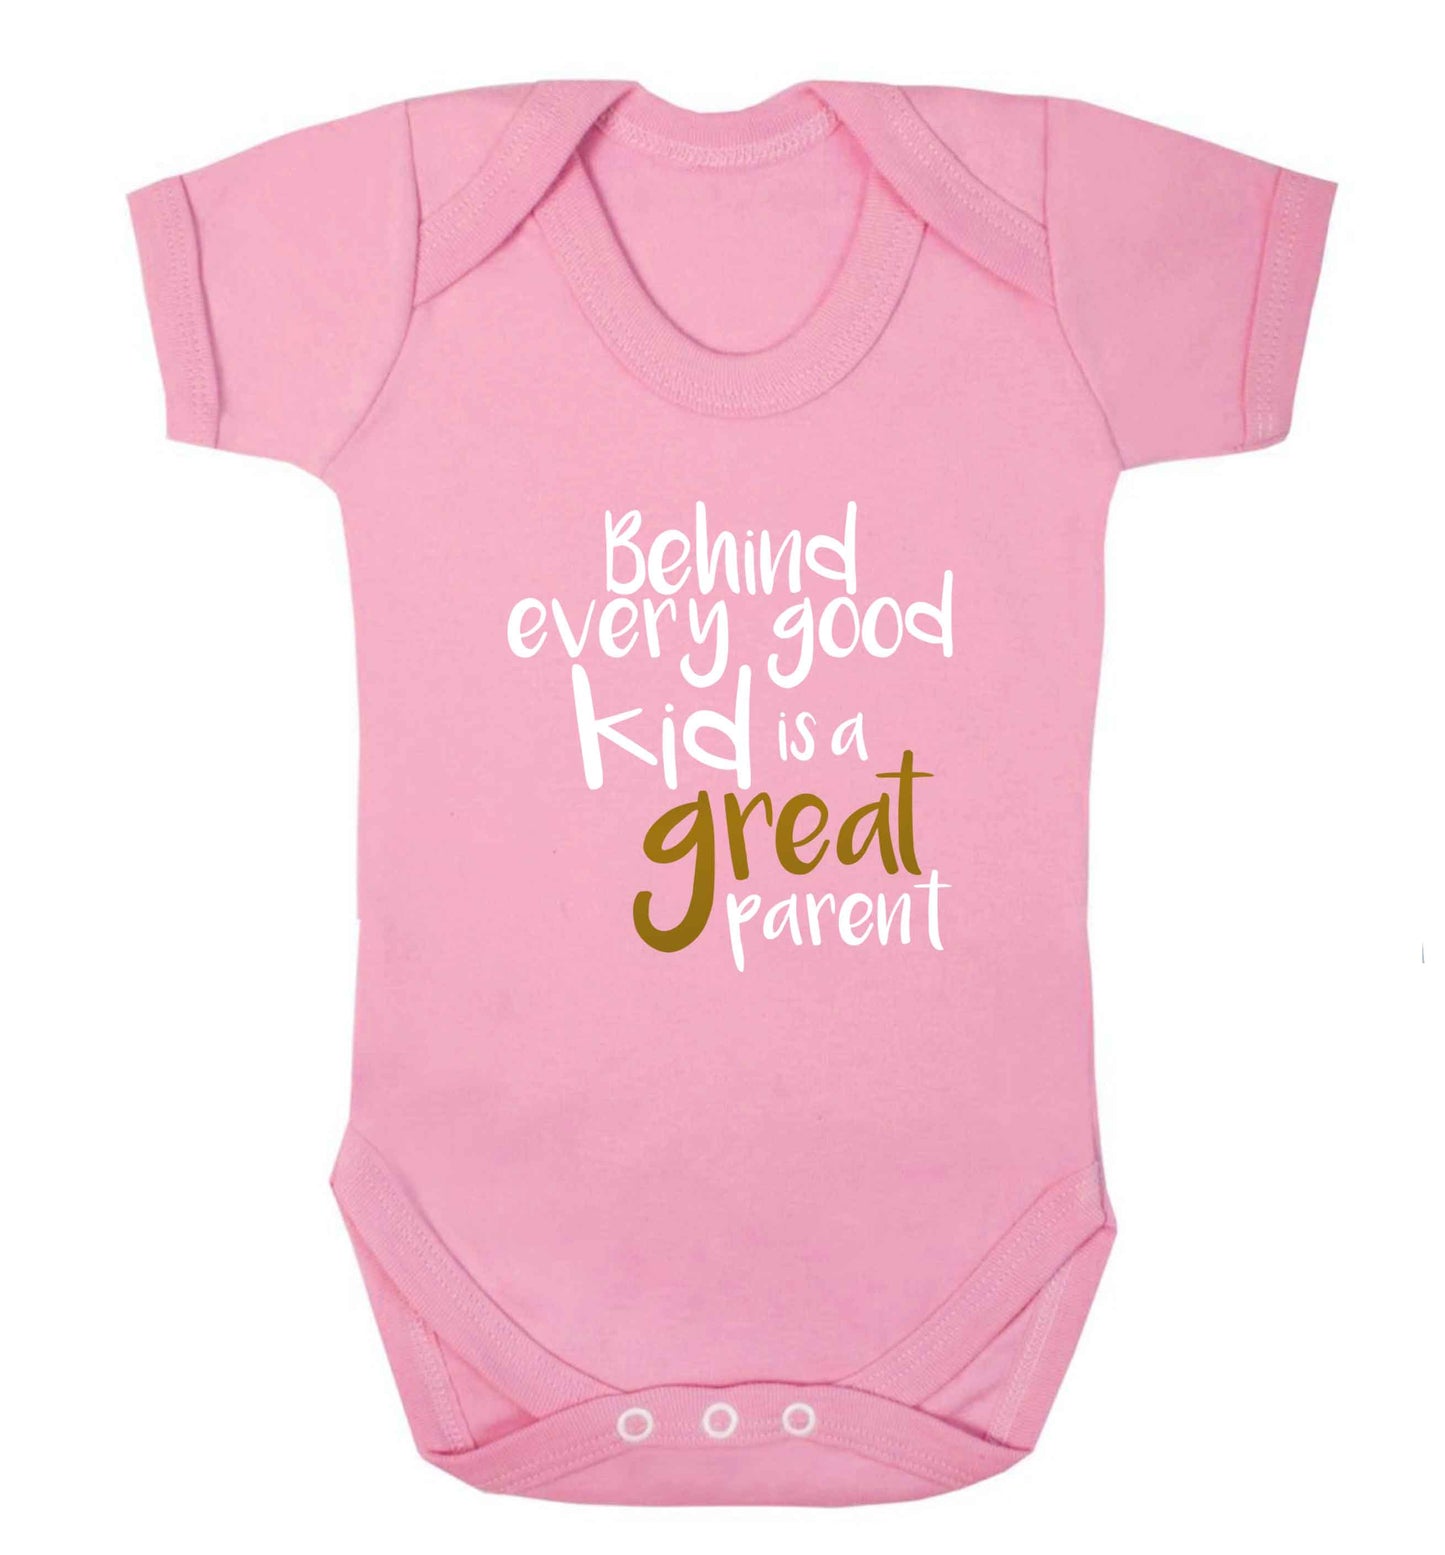 Behind every good kid is a great parent baby vest pale pink 18-24 months